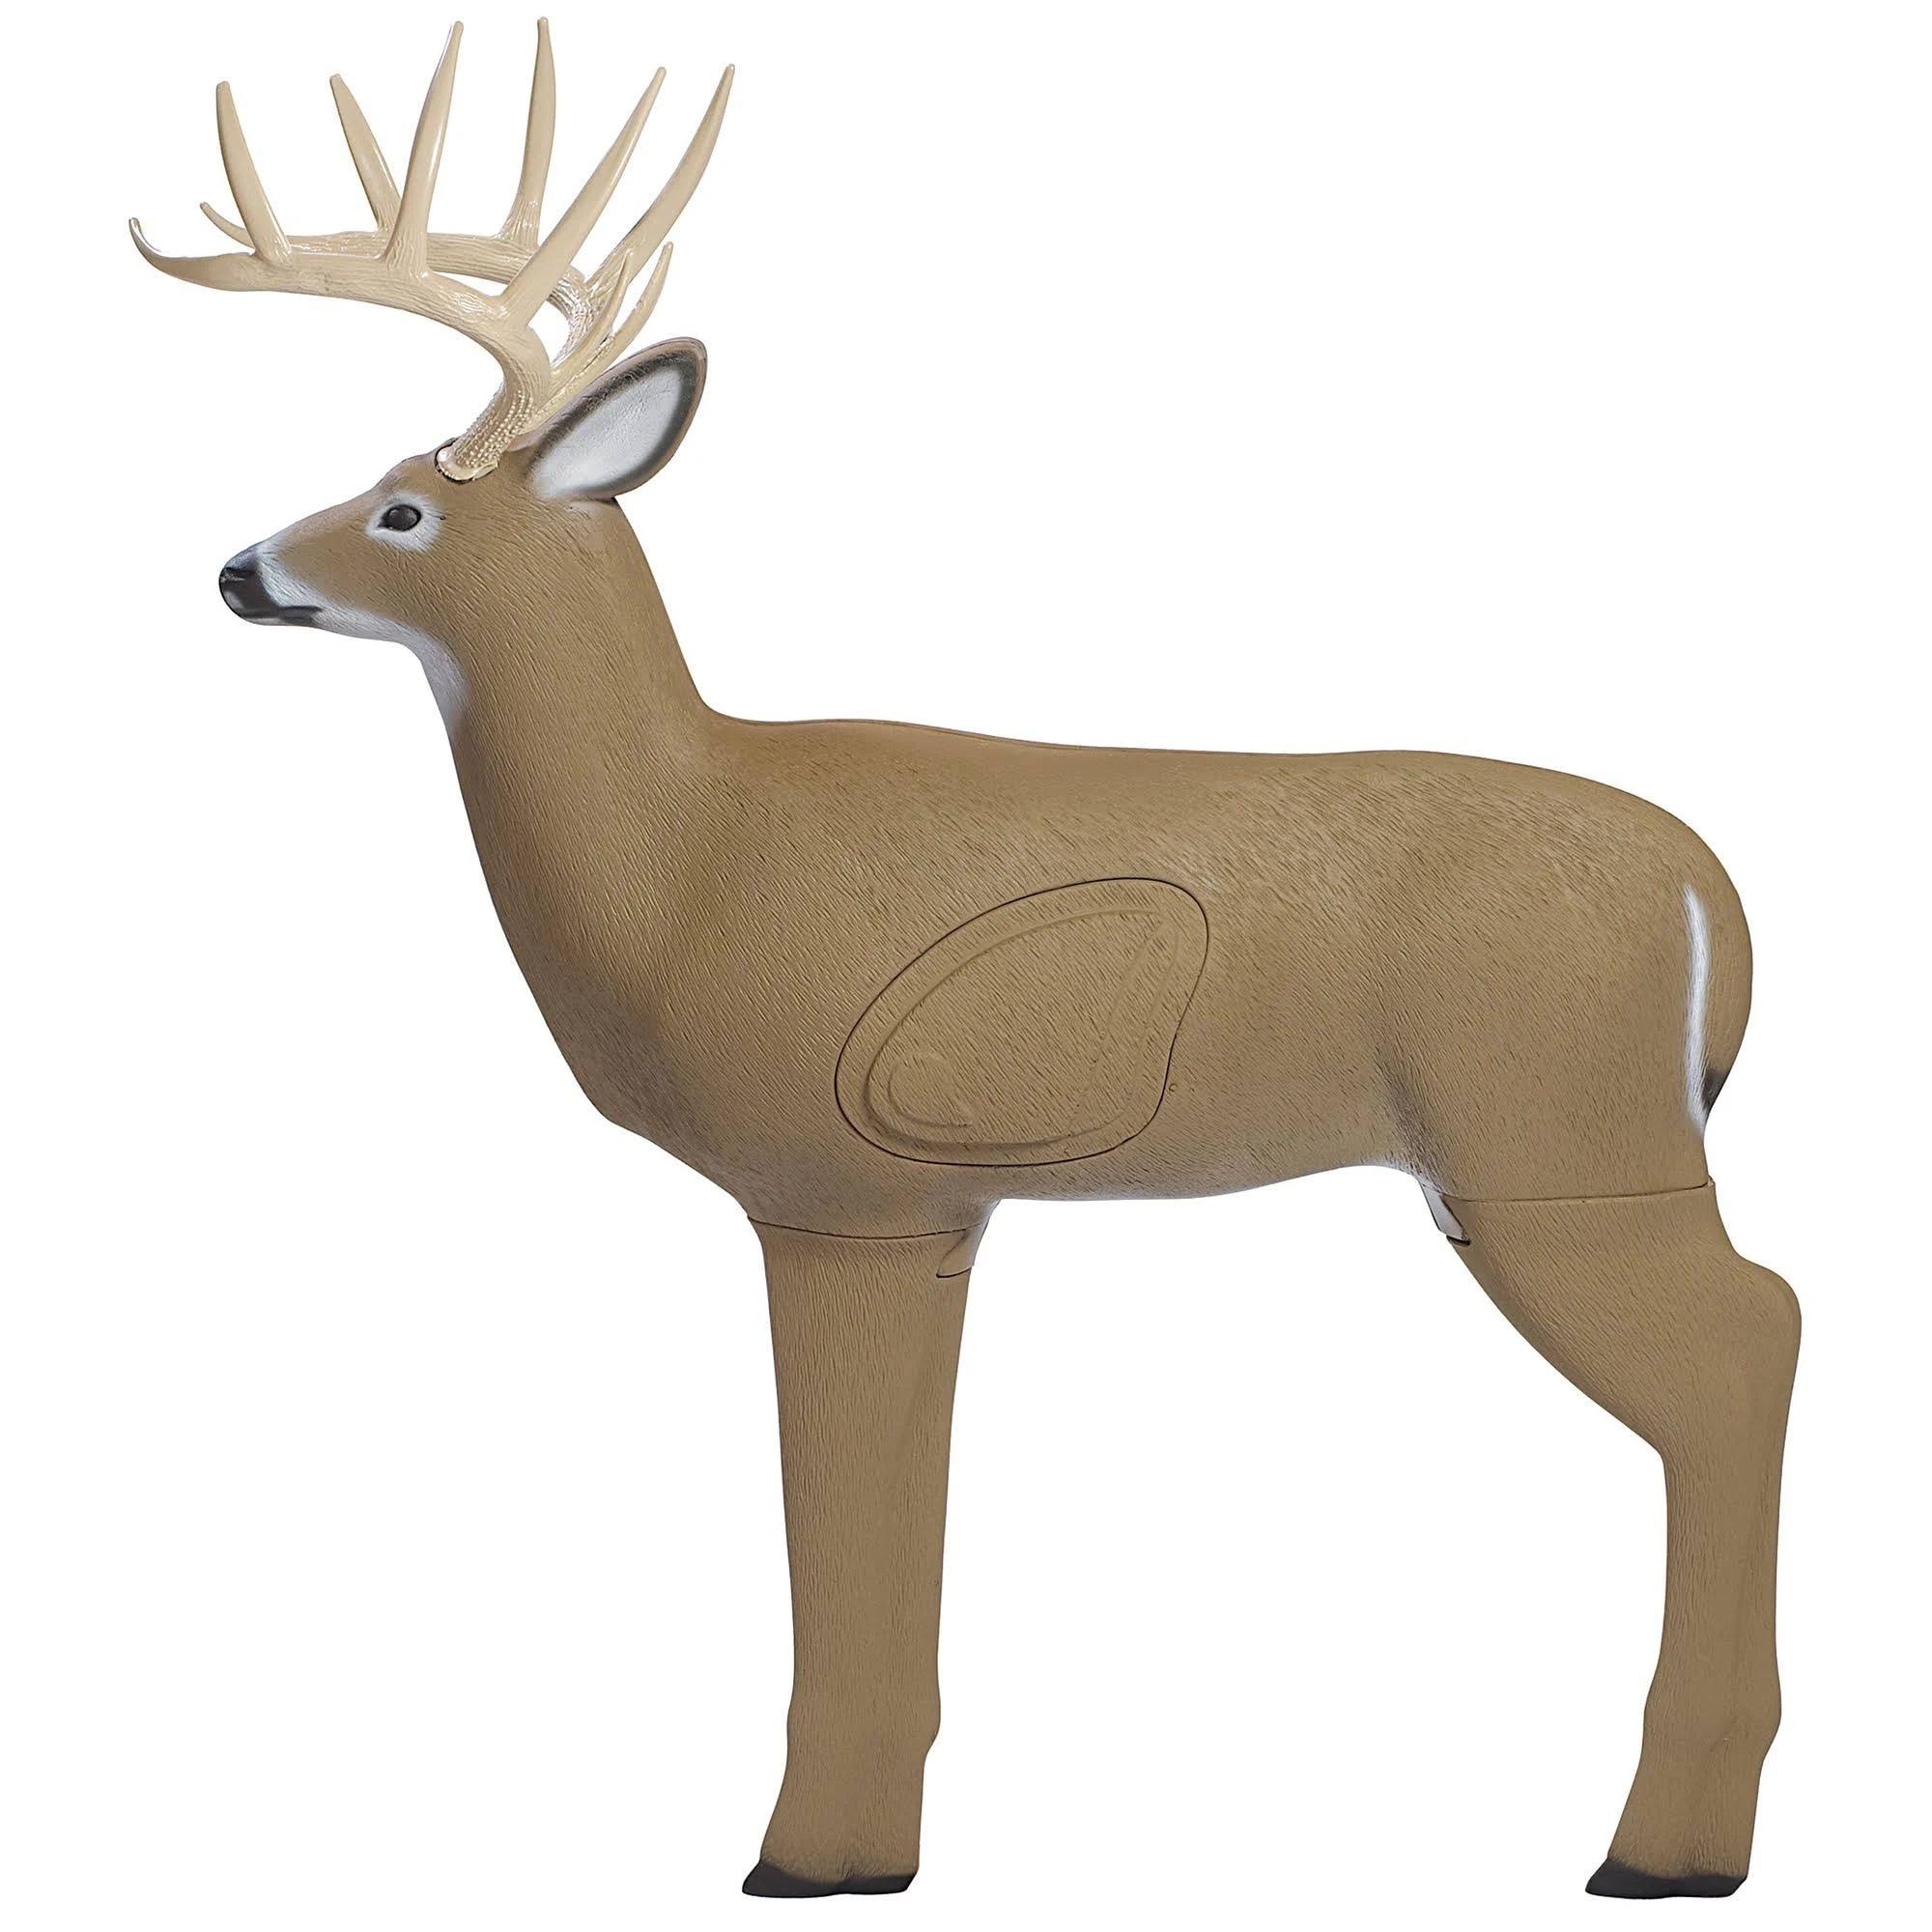 Shooter Crossbow Buck 3d Archery Target - With Replaceable Core